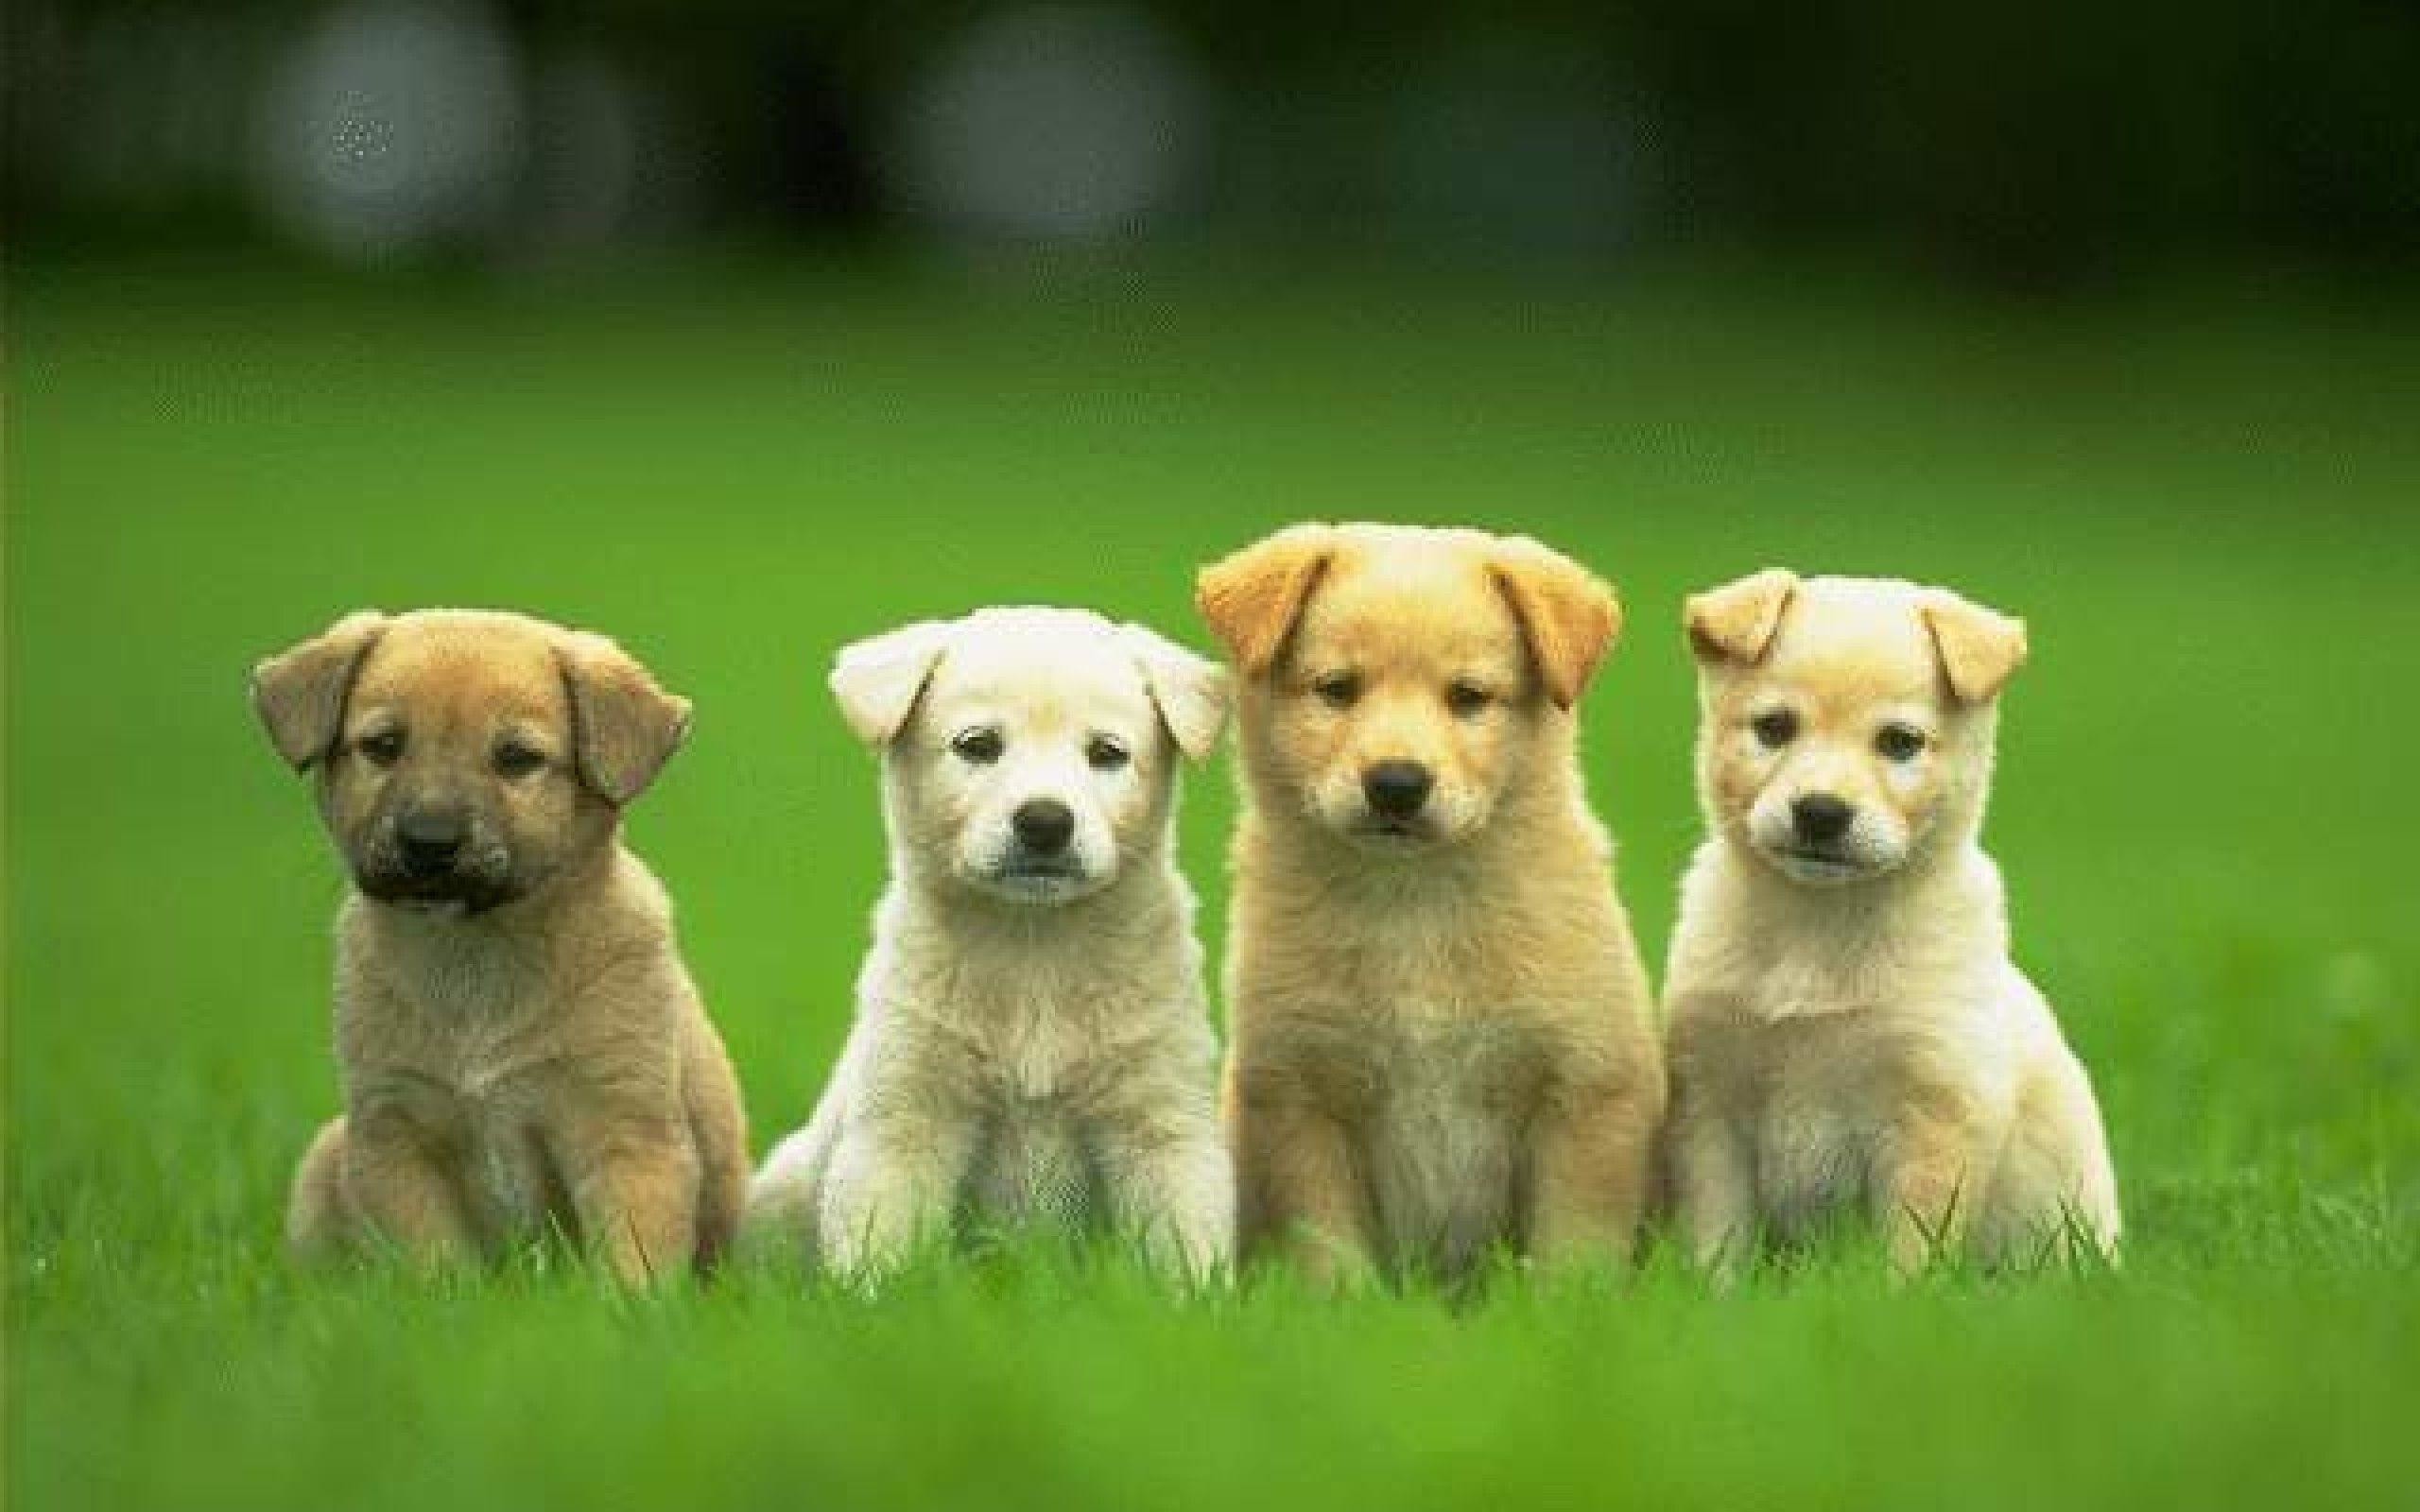 Cute Dogs On The Grass, Animals Wallpaper, Hd Phone - Dog Wallpaper Hd -  2560x1600 Wallpaper 